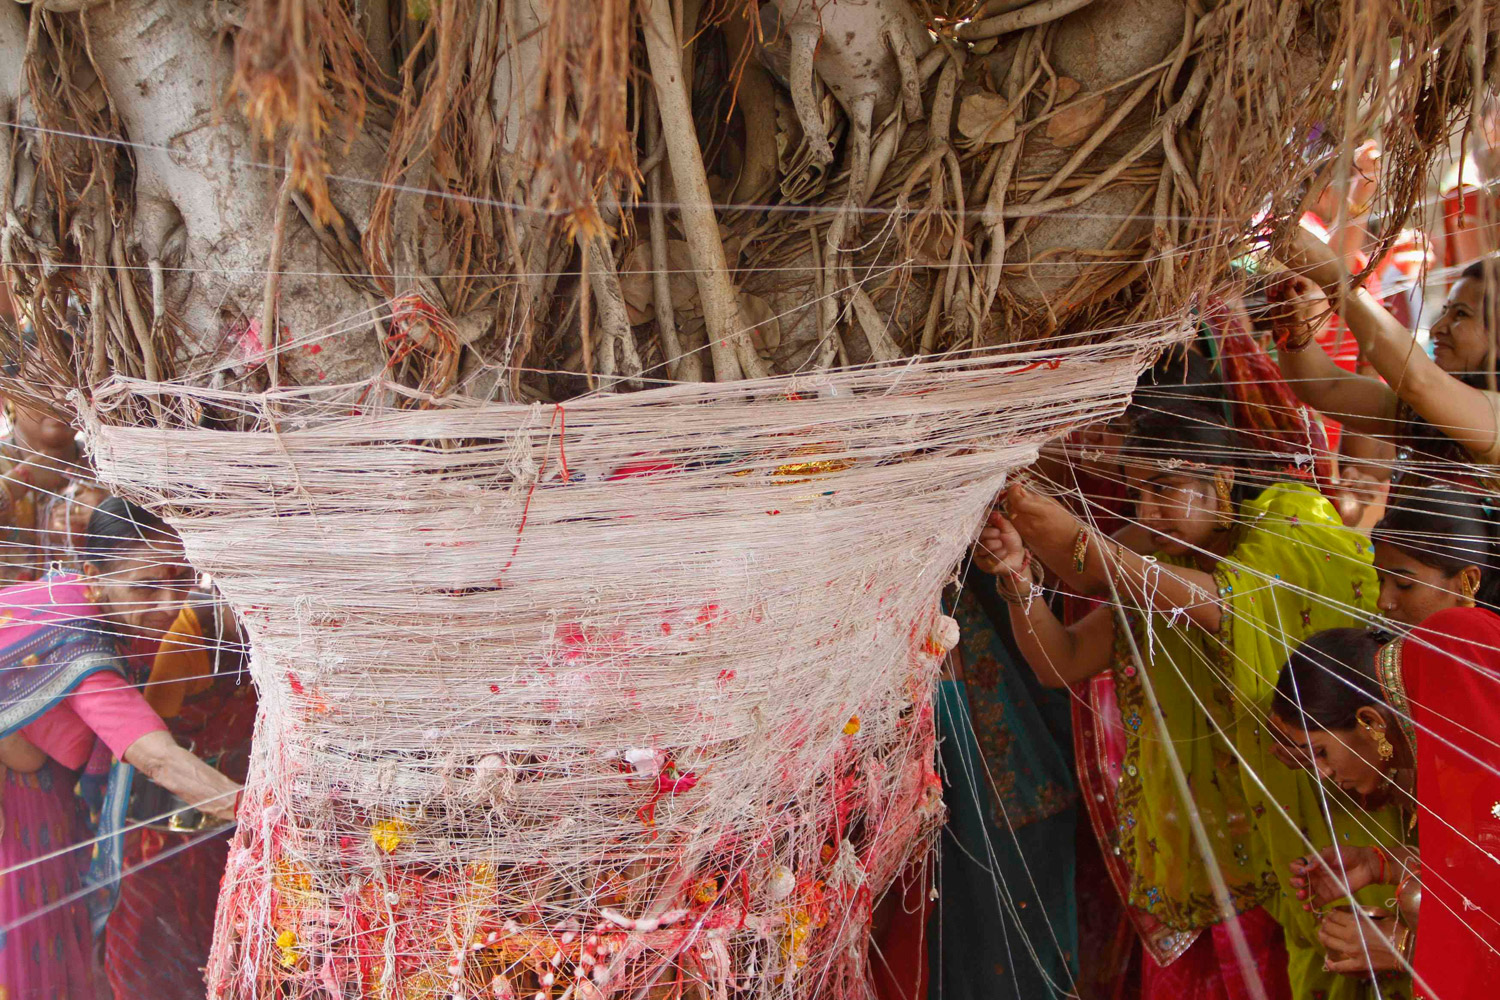 June 4, 2012. Married Hindu women tie sacred threads around a banyan tree in a ceremony during the religious festival of Vata Savitri Purnima in the western Indian city of Ahmedabad. During the festival, married women fast for the whole day to pray for the betterment of their husbands, family and society.